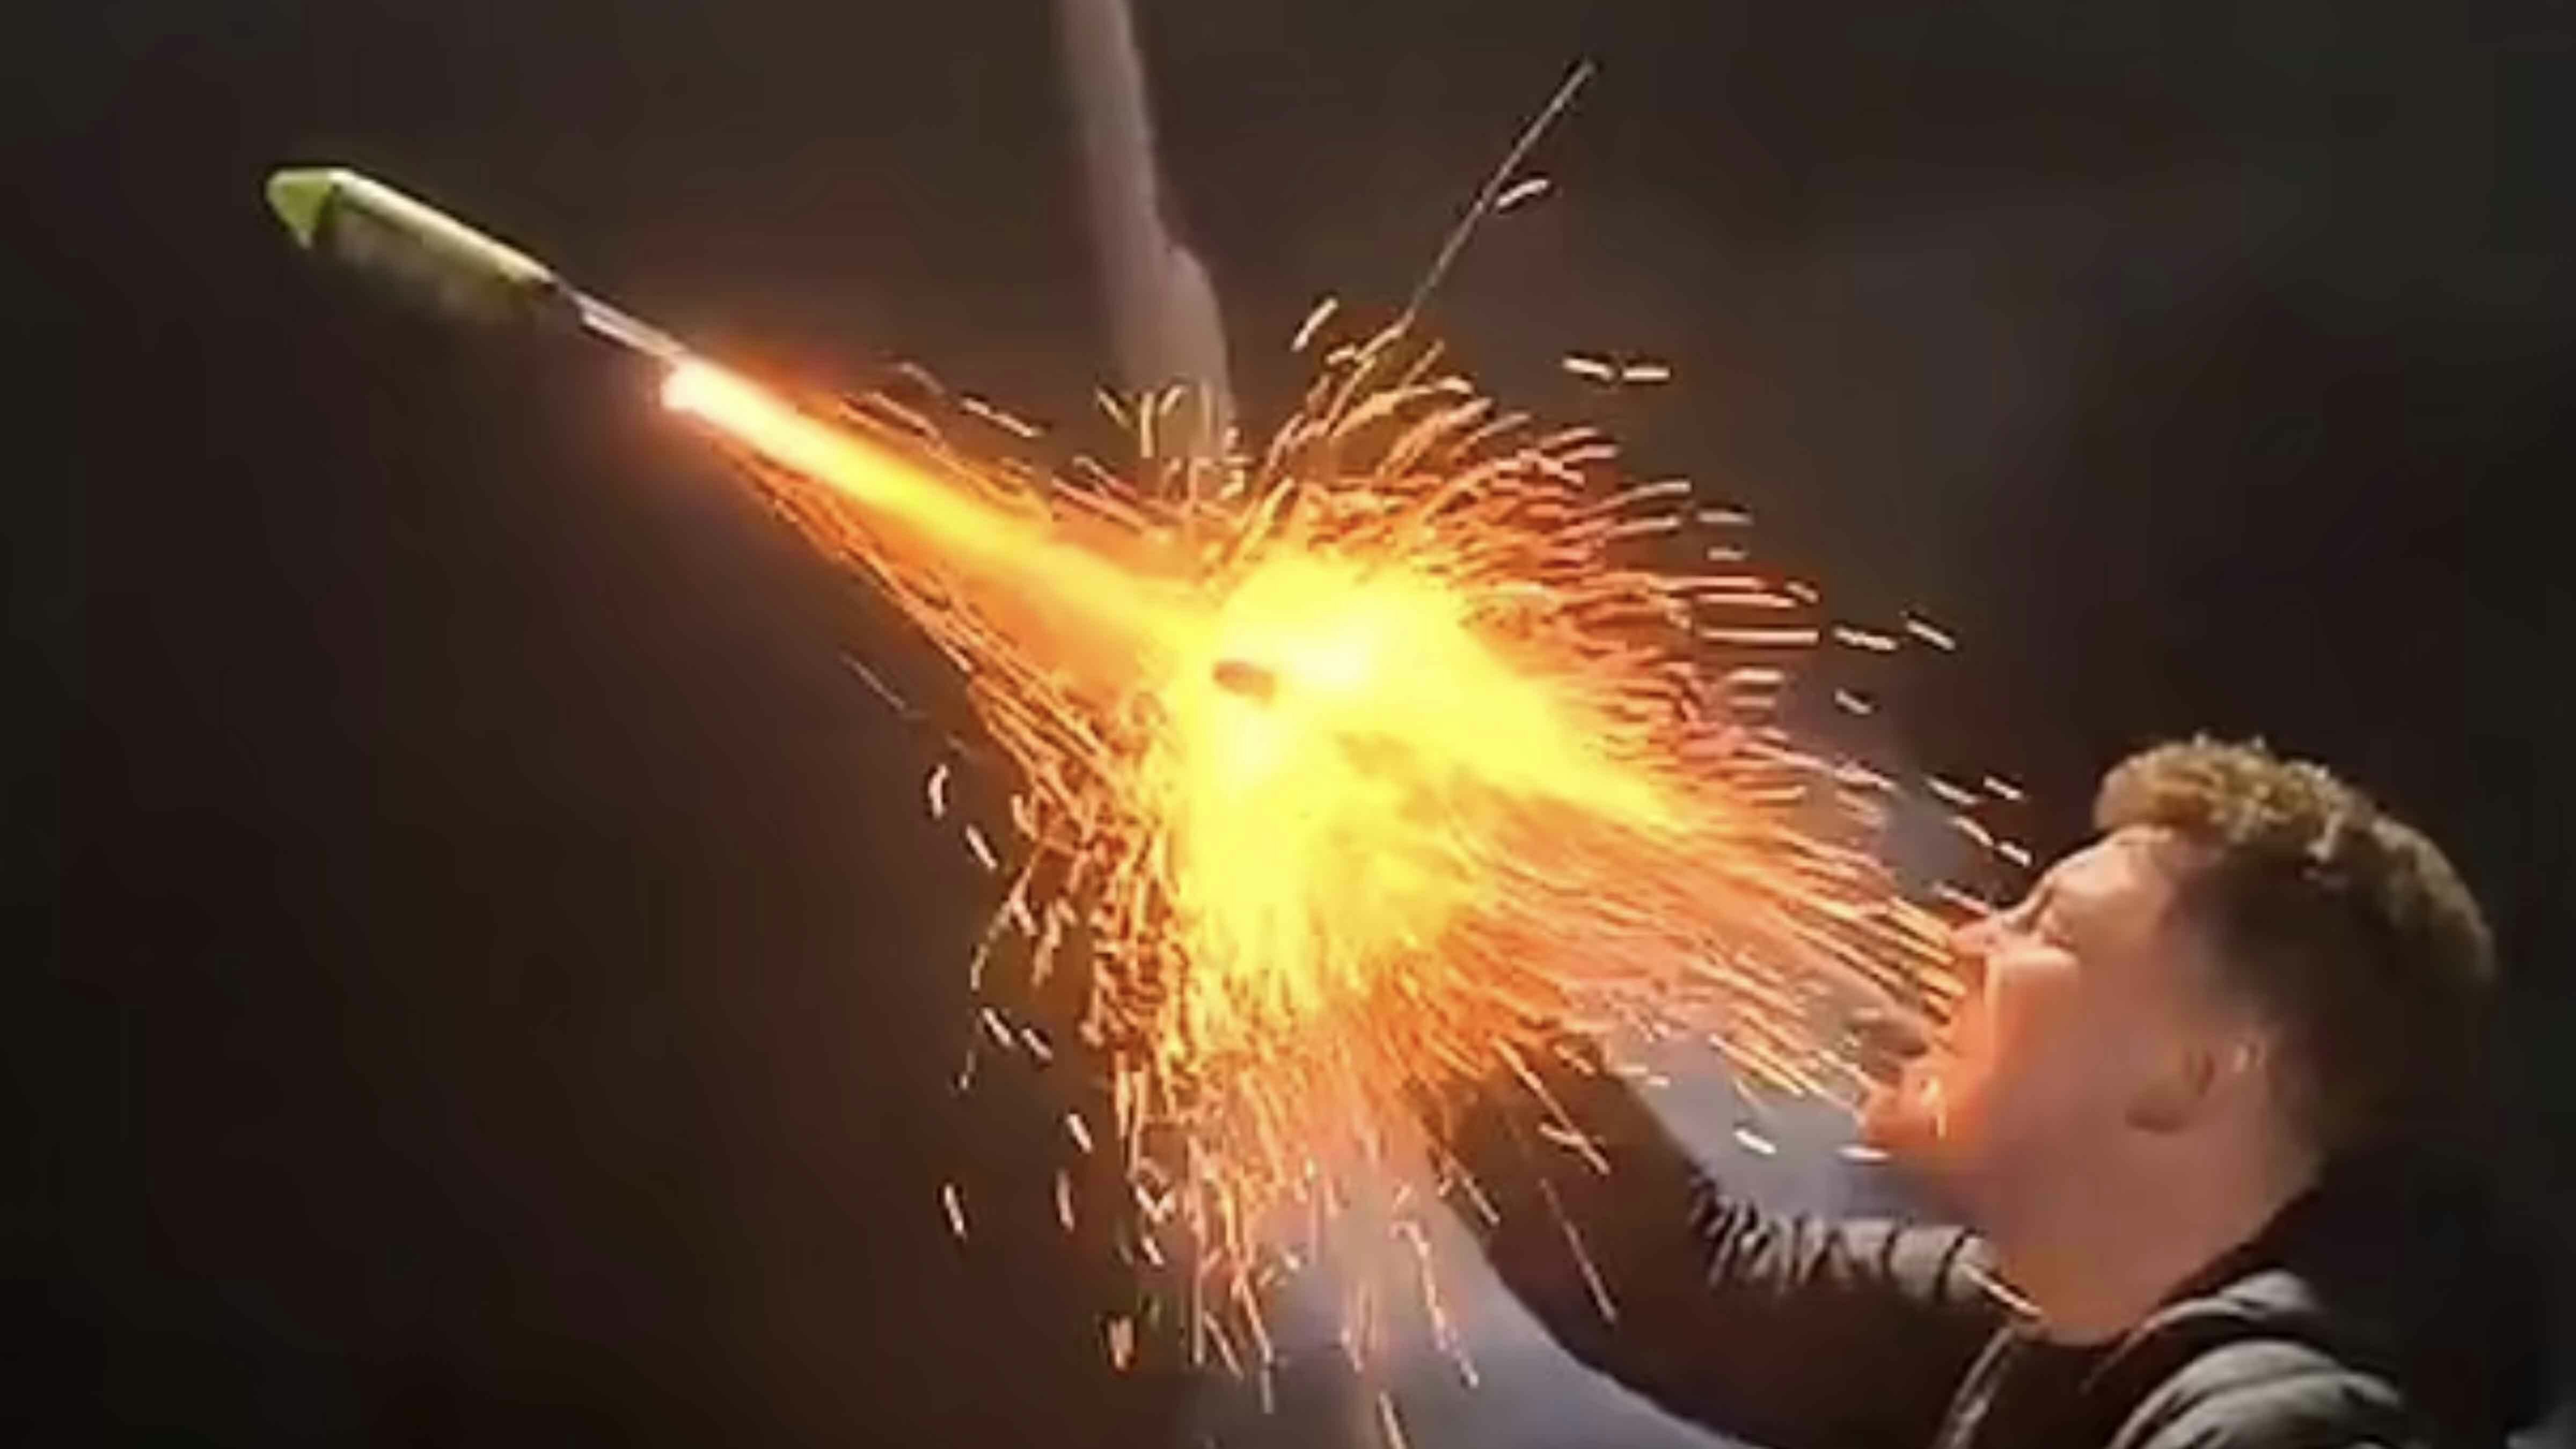 Man shooting fireworks from his mouth.